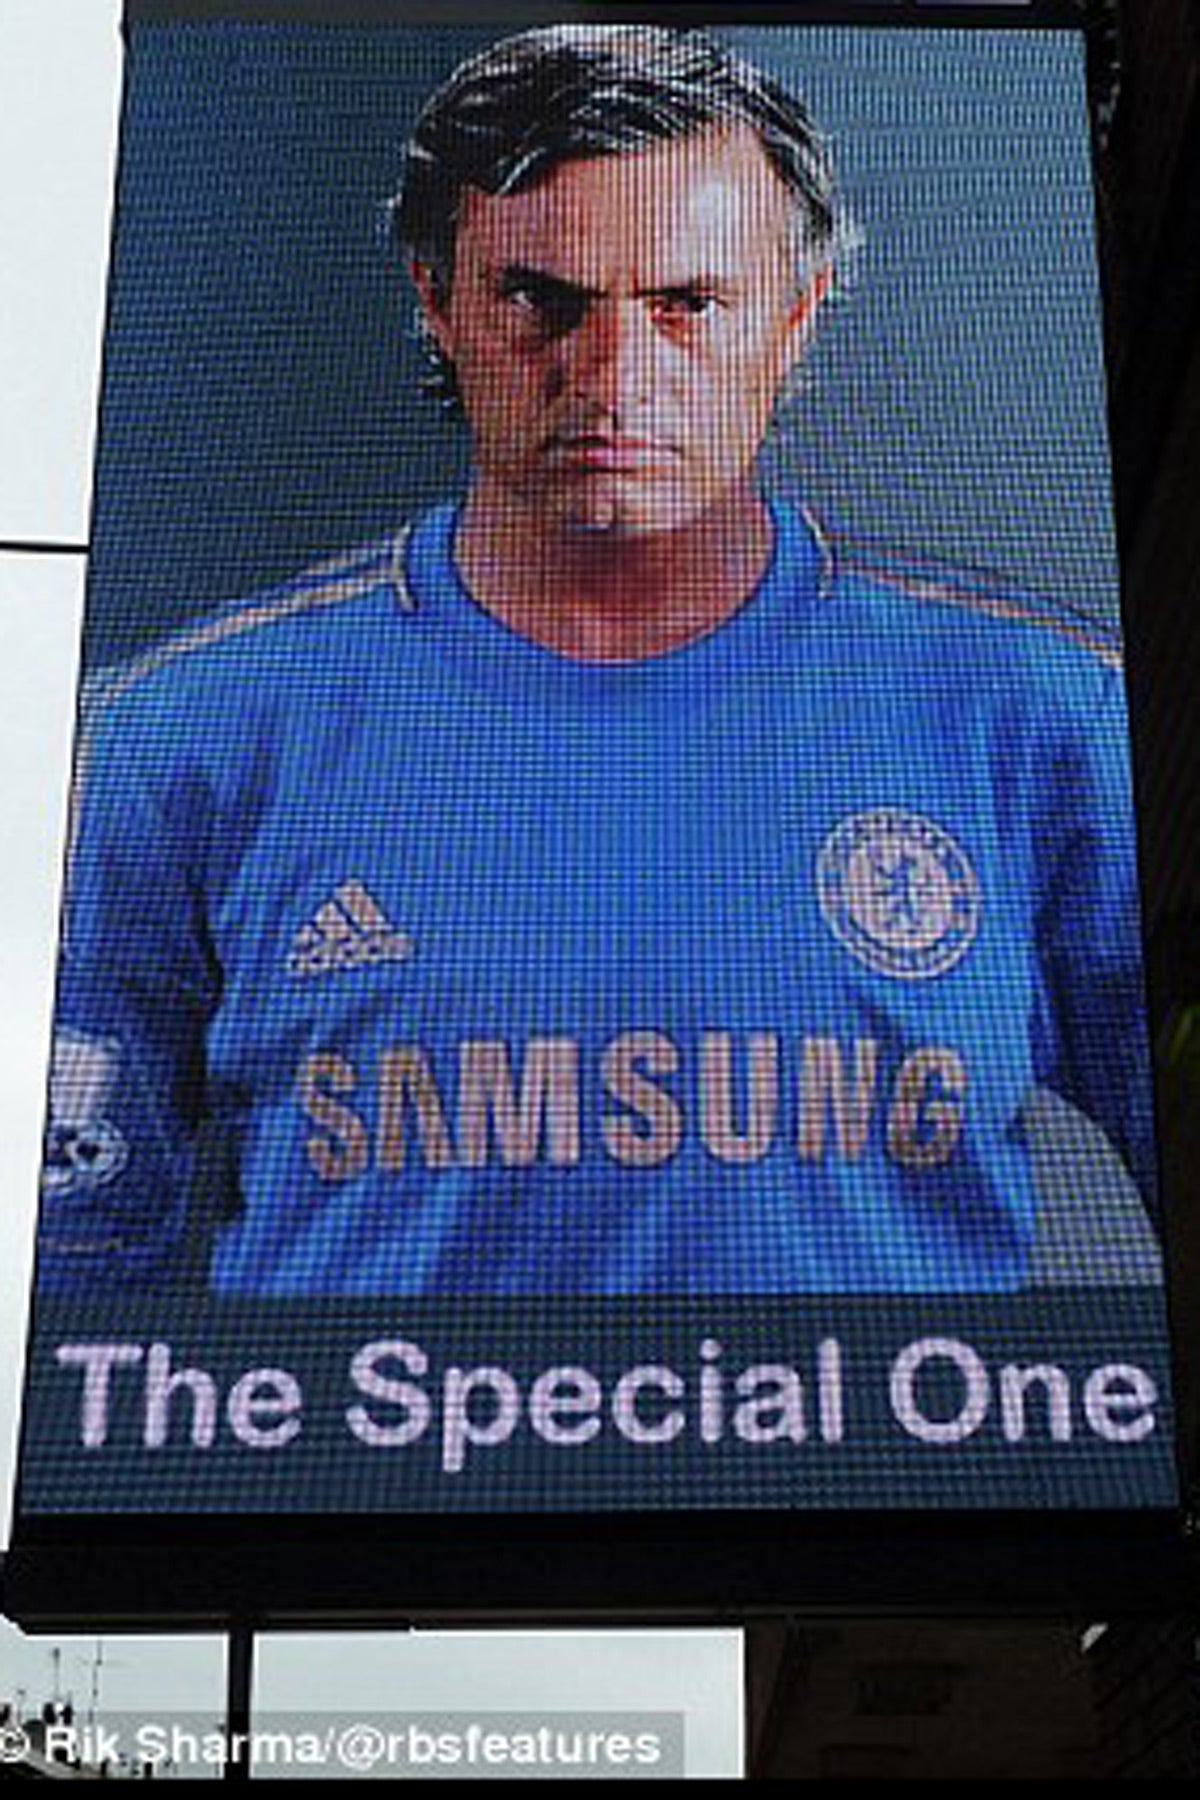 Jose Mourinho appears in a photoshopped image advertising a digital media company